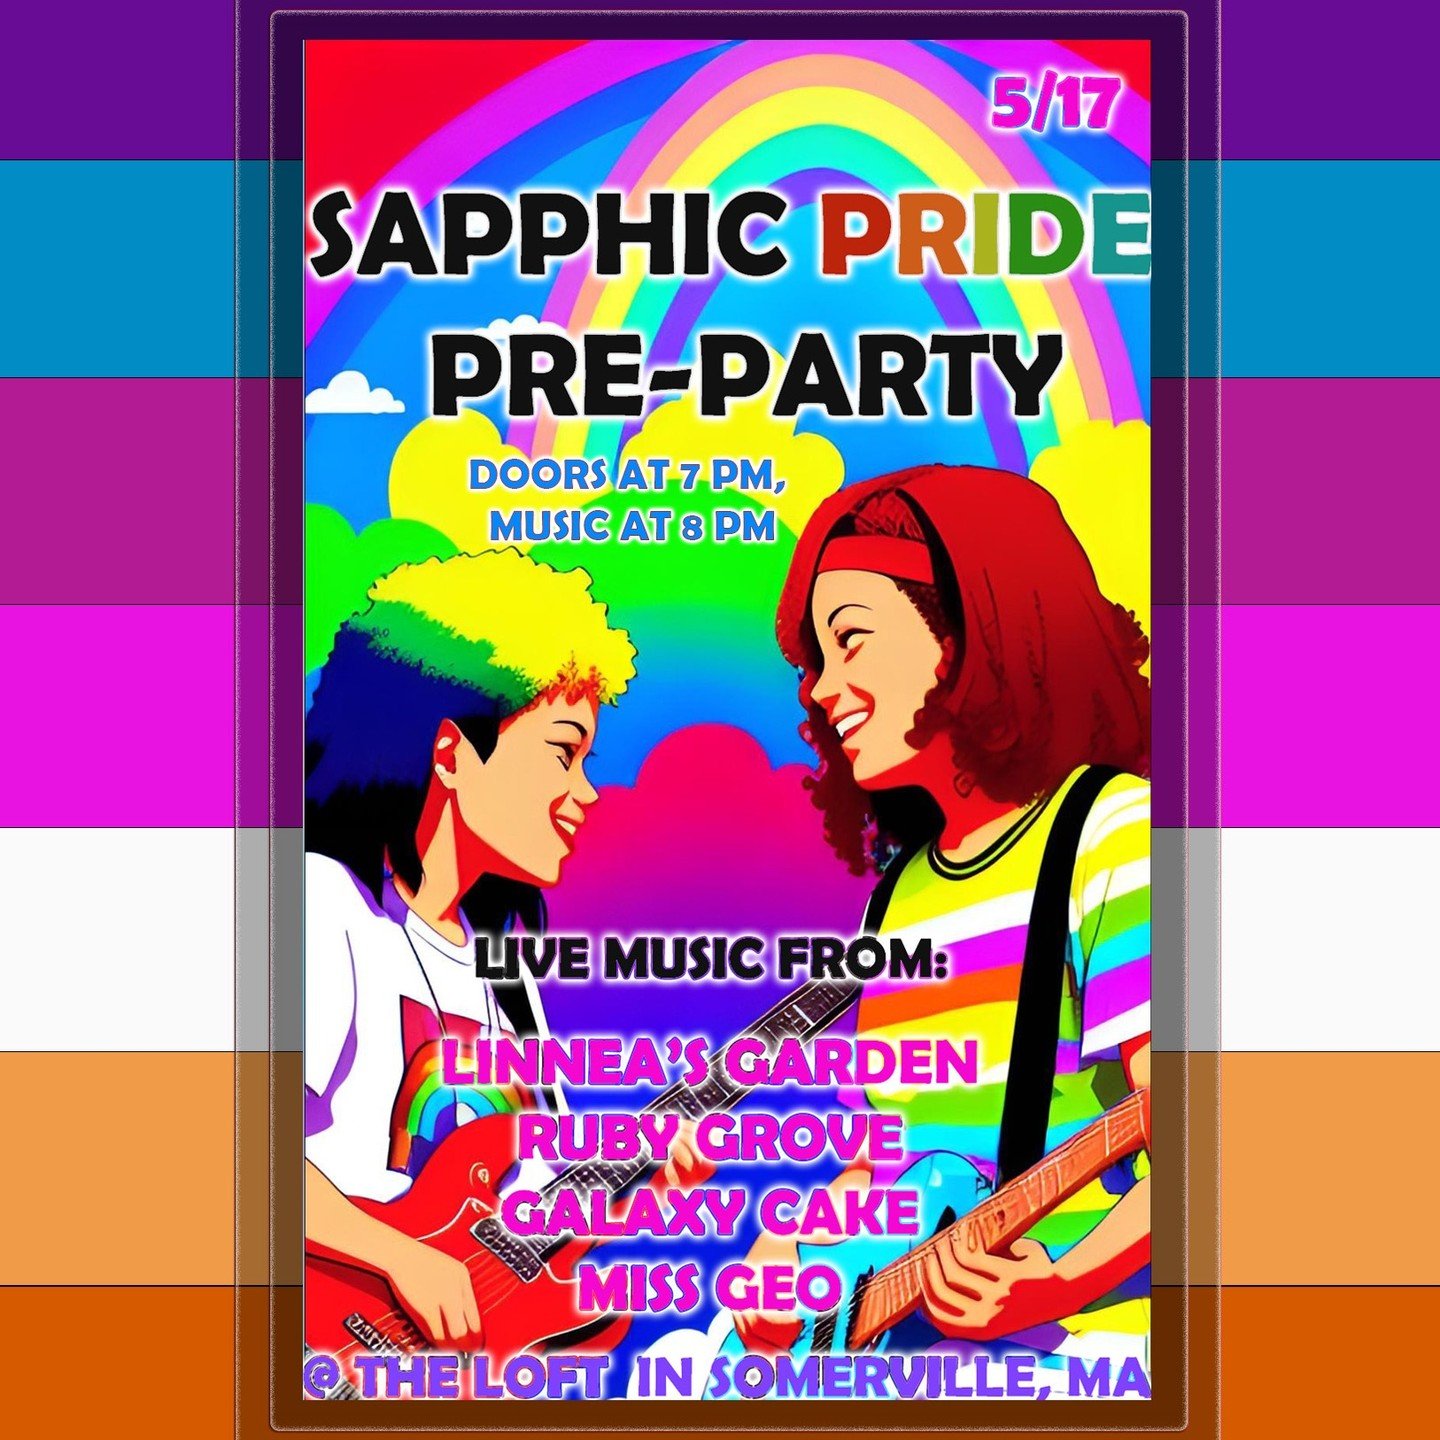 JUST ANNOUNCED! We're putting on a Pride pre-party show honoring sapphic and queer communities in Boston! For those who don't know, sapphic is an inclusive umbrella term for attraction or relationships between queer women&mdash;whether they identify 